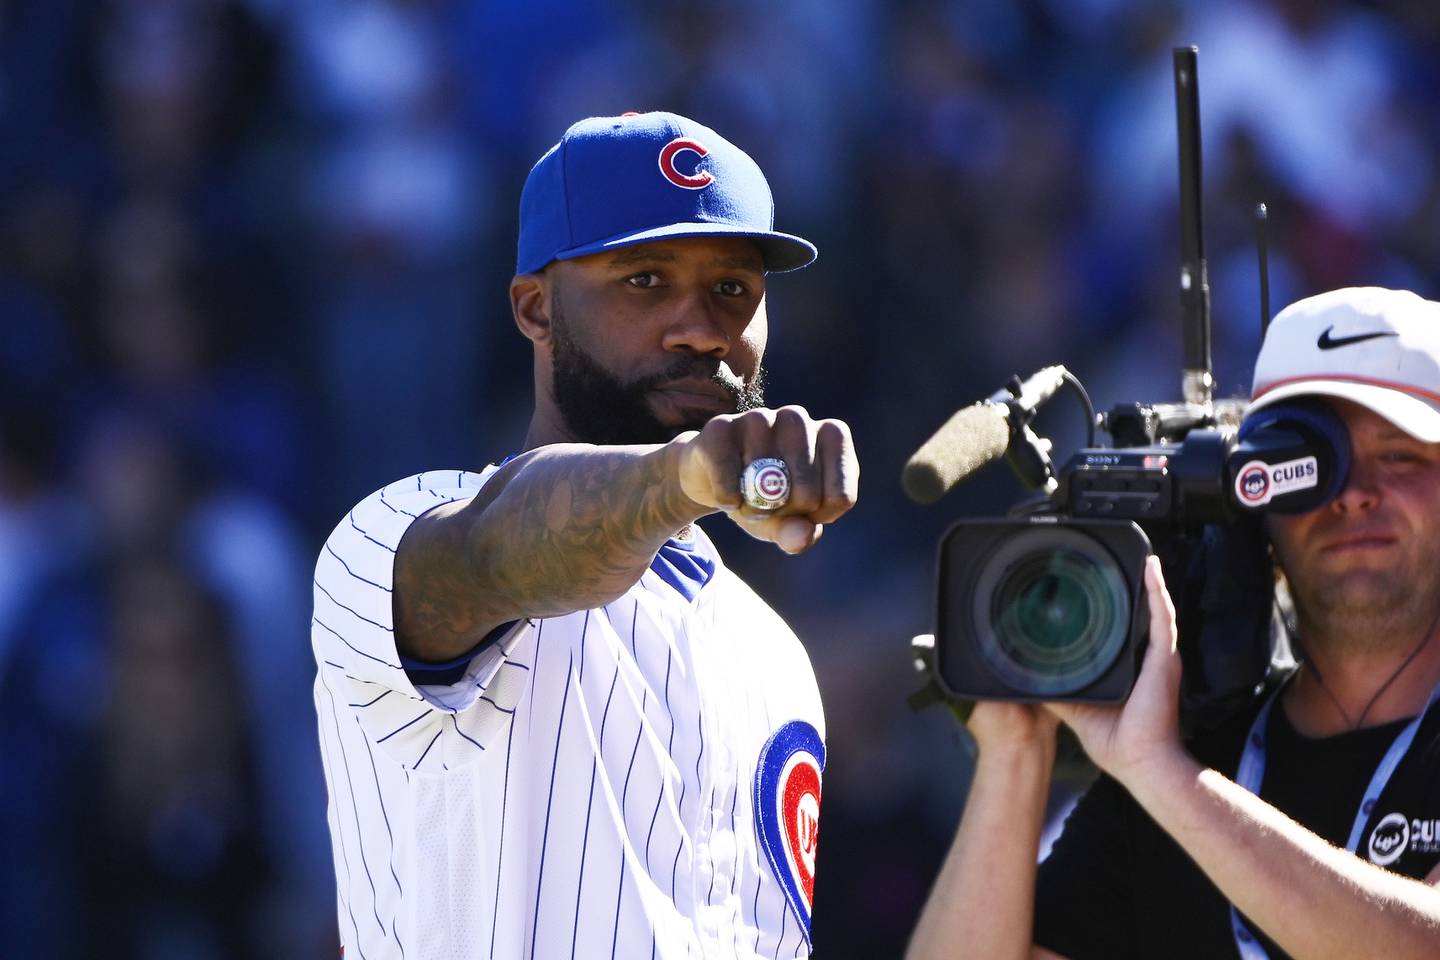 Cubs outfielder Jason Heyward, shows off his World Series ring while being honored during the team's game against the Reds on Saturday at Wrigley Field. 